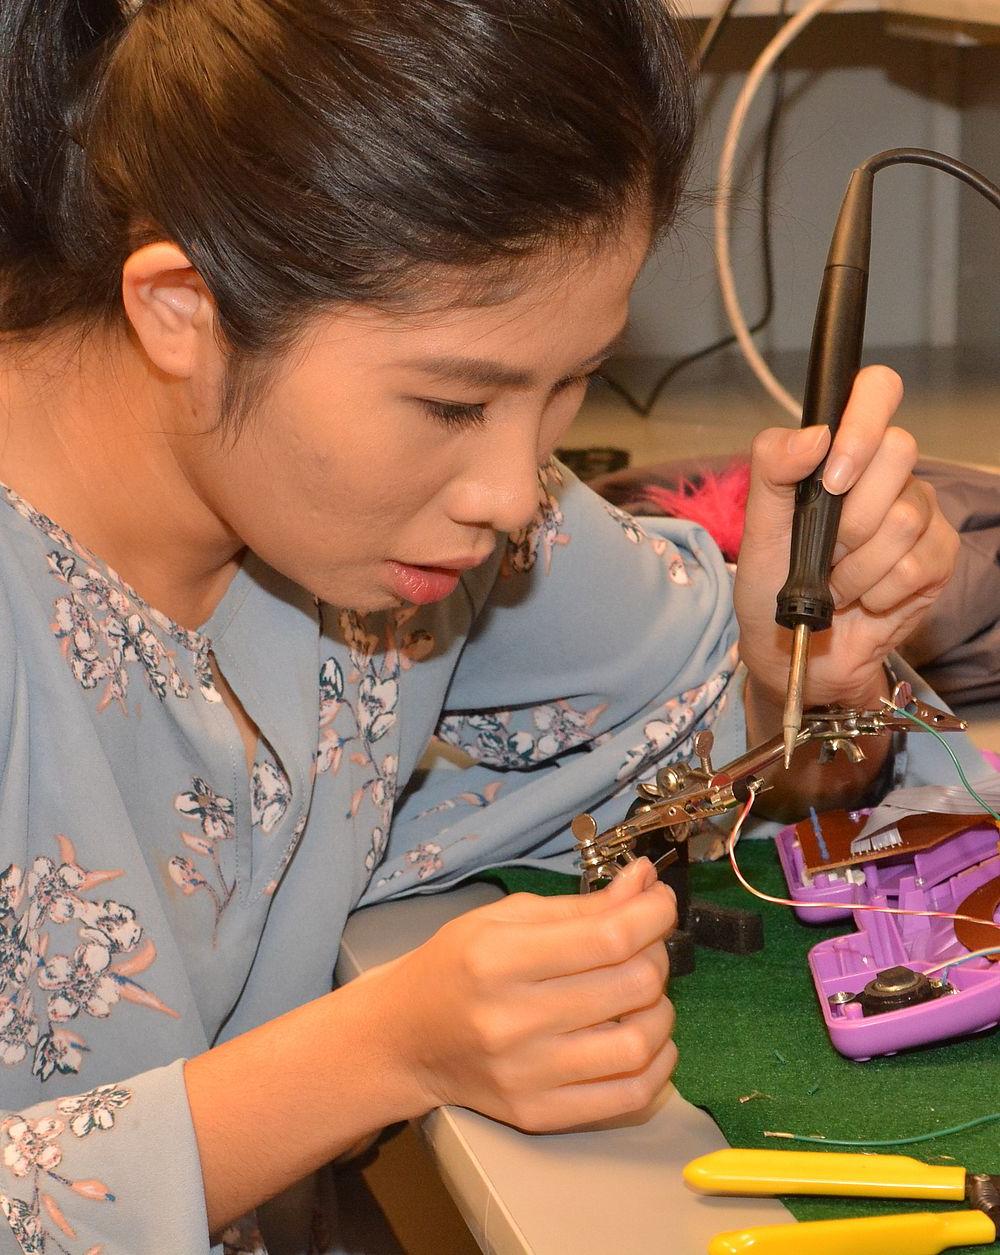 Female student solders wires on plastic toy. 